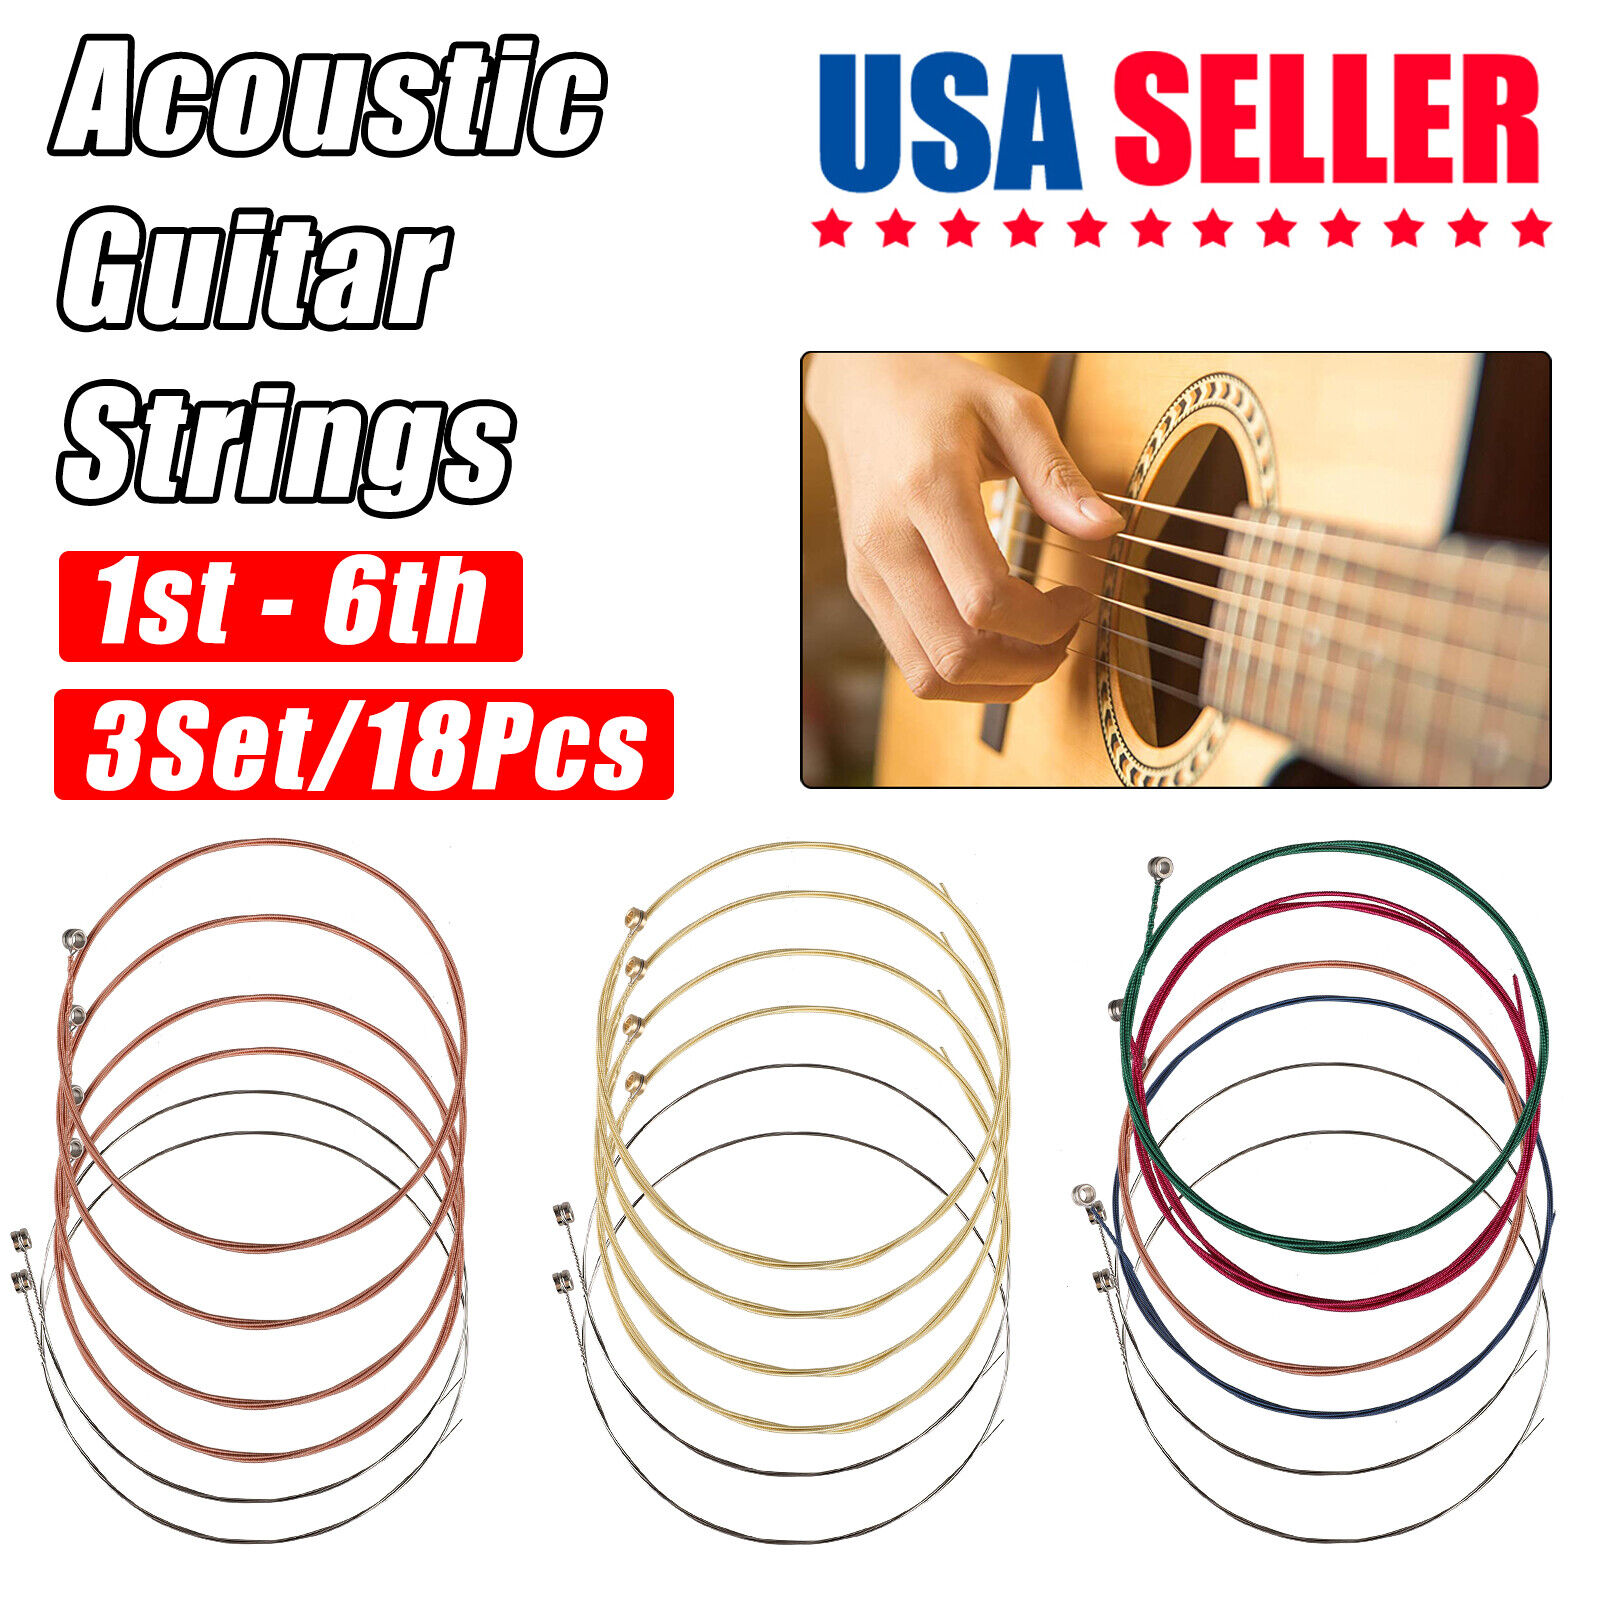 3Sets of 6 Guitar Strings Replacement Colorful Steel for Acoustic Guitar 1st-6th